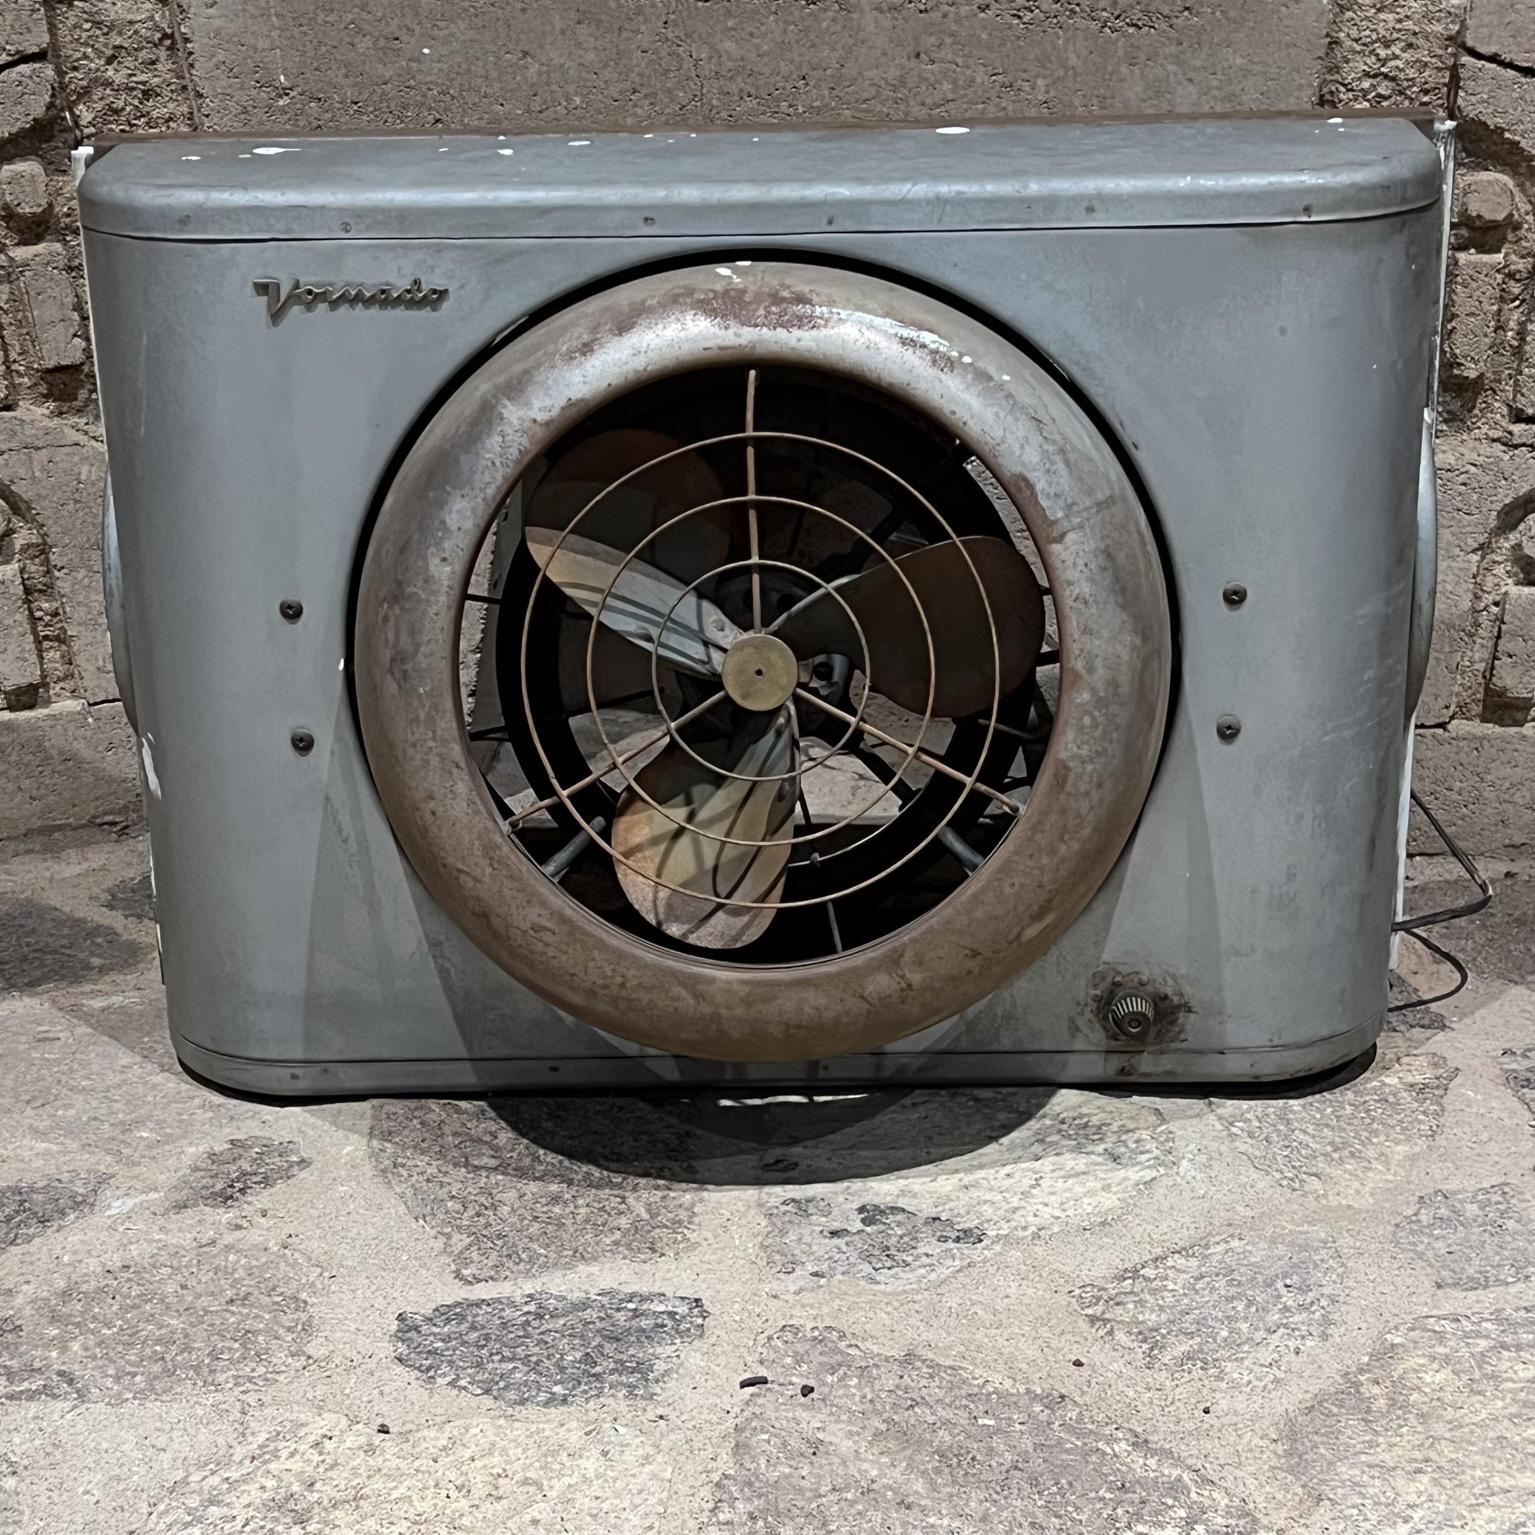 1950s Vintage Wall Unit Vornado Industrial Gray Electric Window Fan
18 h 37 w (open) 25.5 w closed x 9.5 d
Preowned unrestored vintage condition.
Missing circle with label in center
White paint drips. Dusty. Old Stock.
Tested and working! Ready to